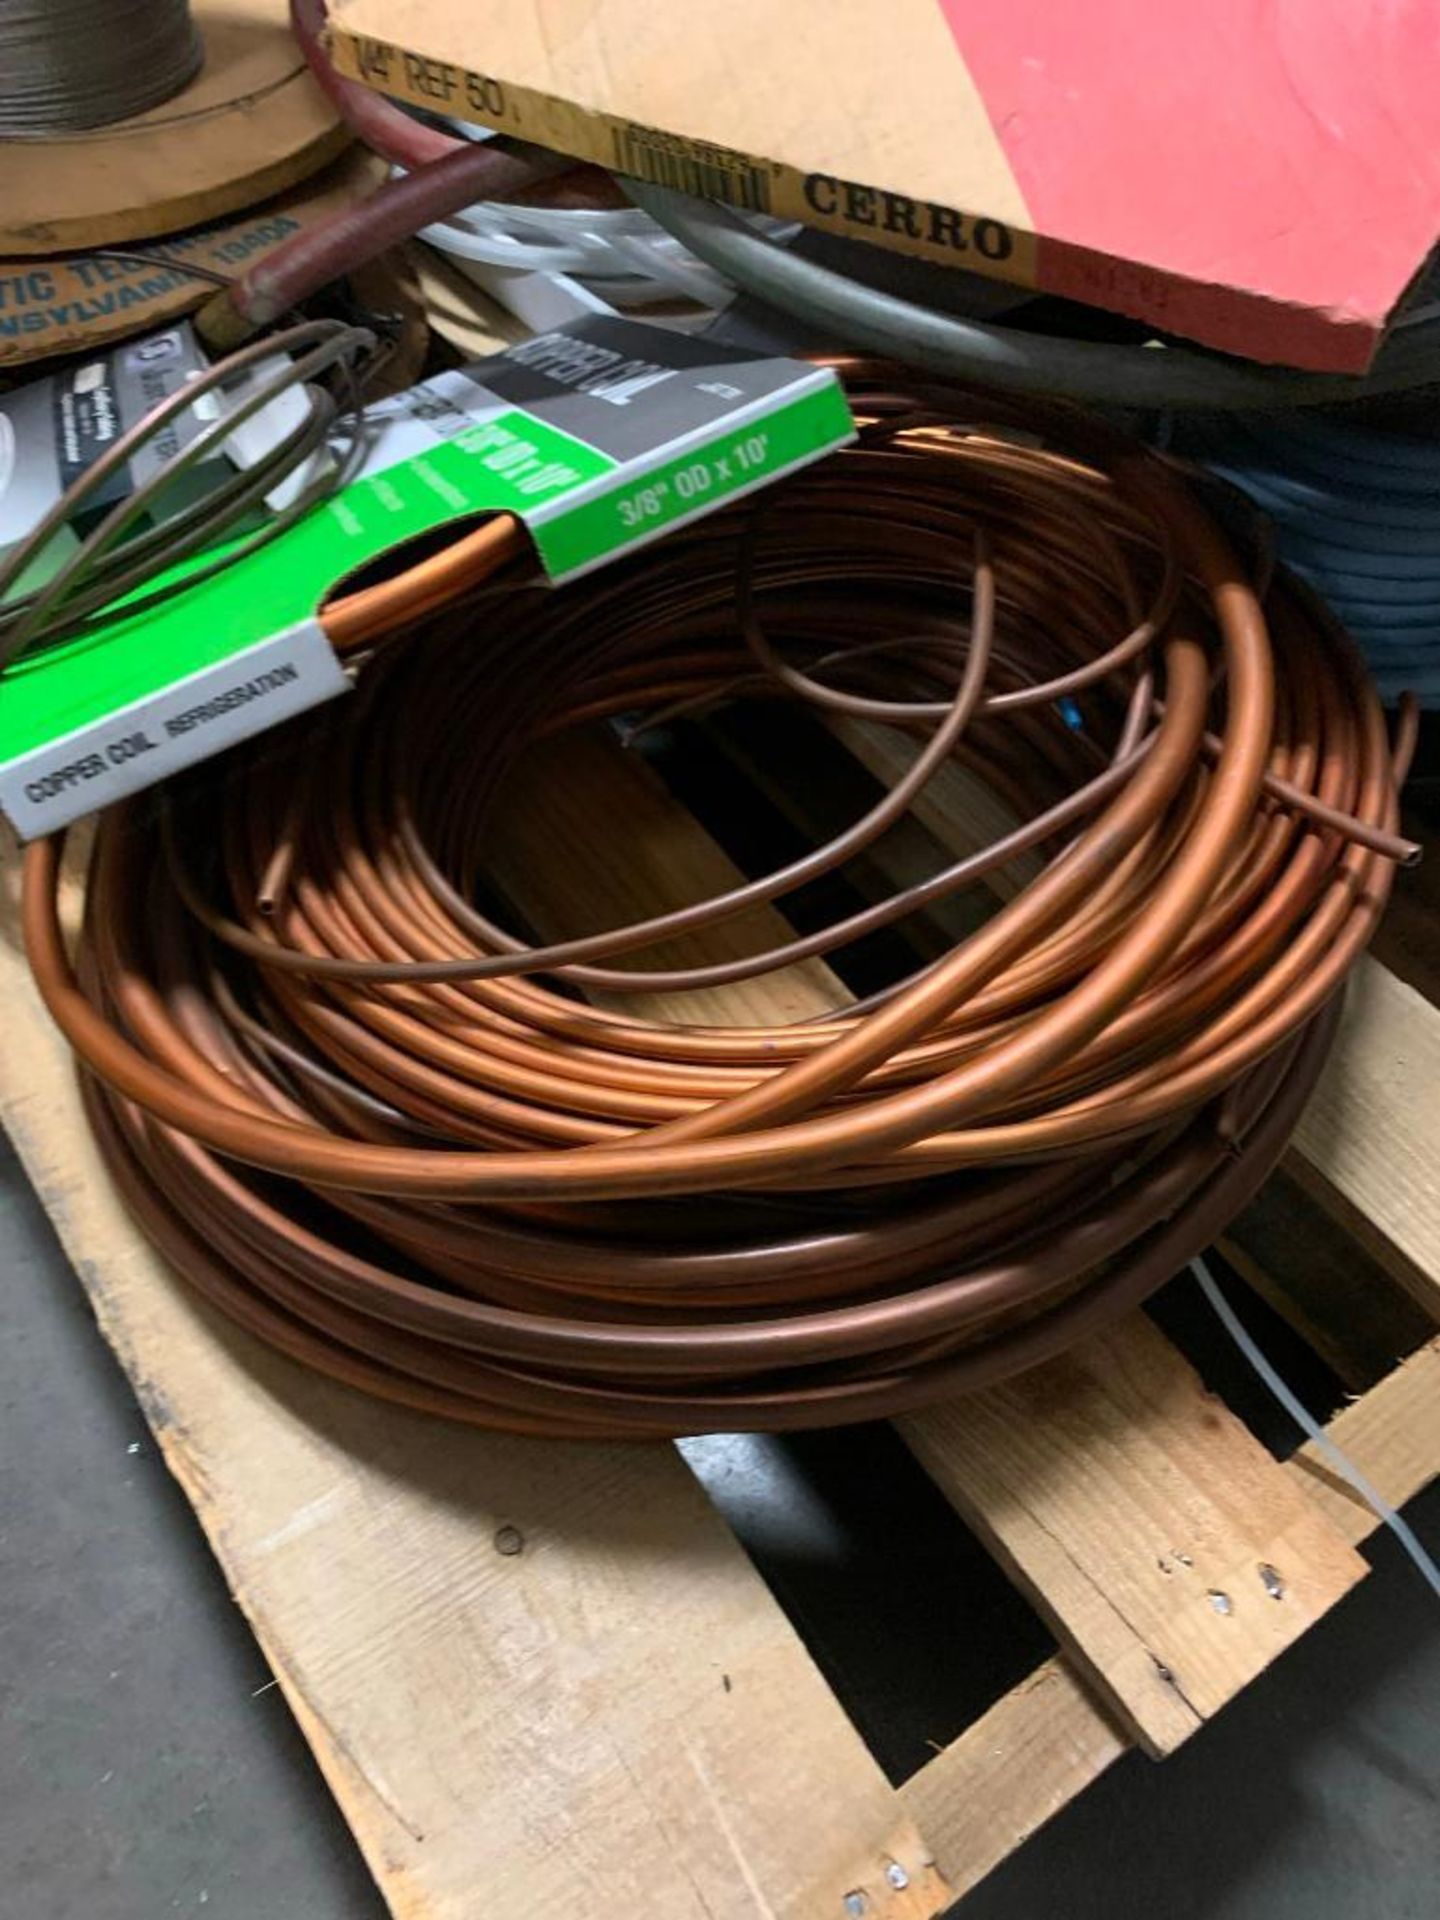 Air Hose, Copper Tubing, Gasket Material, Cable (on pallet) - Image 4 of 4